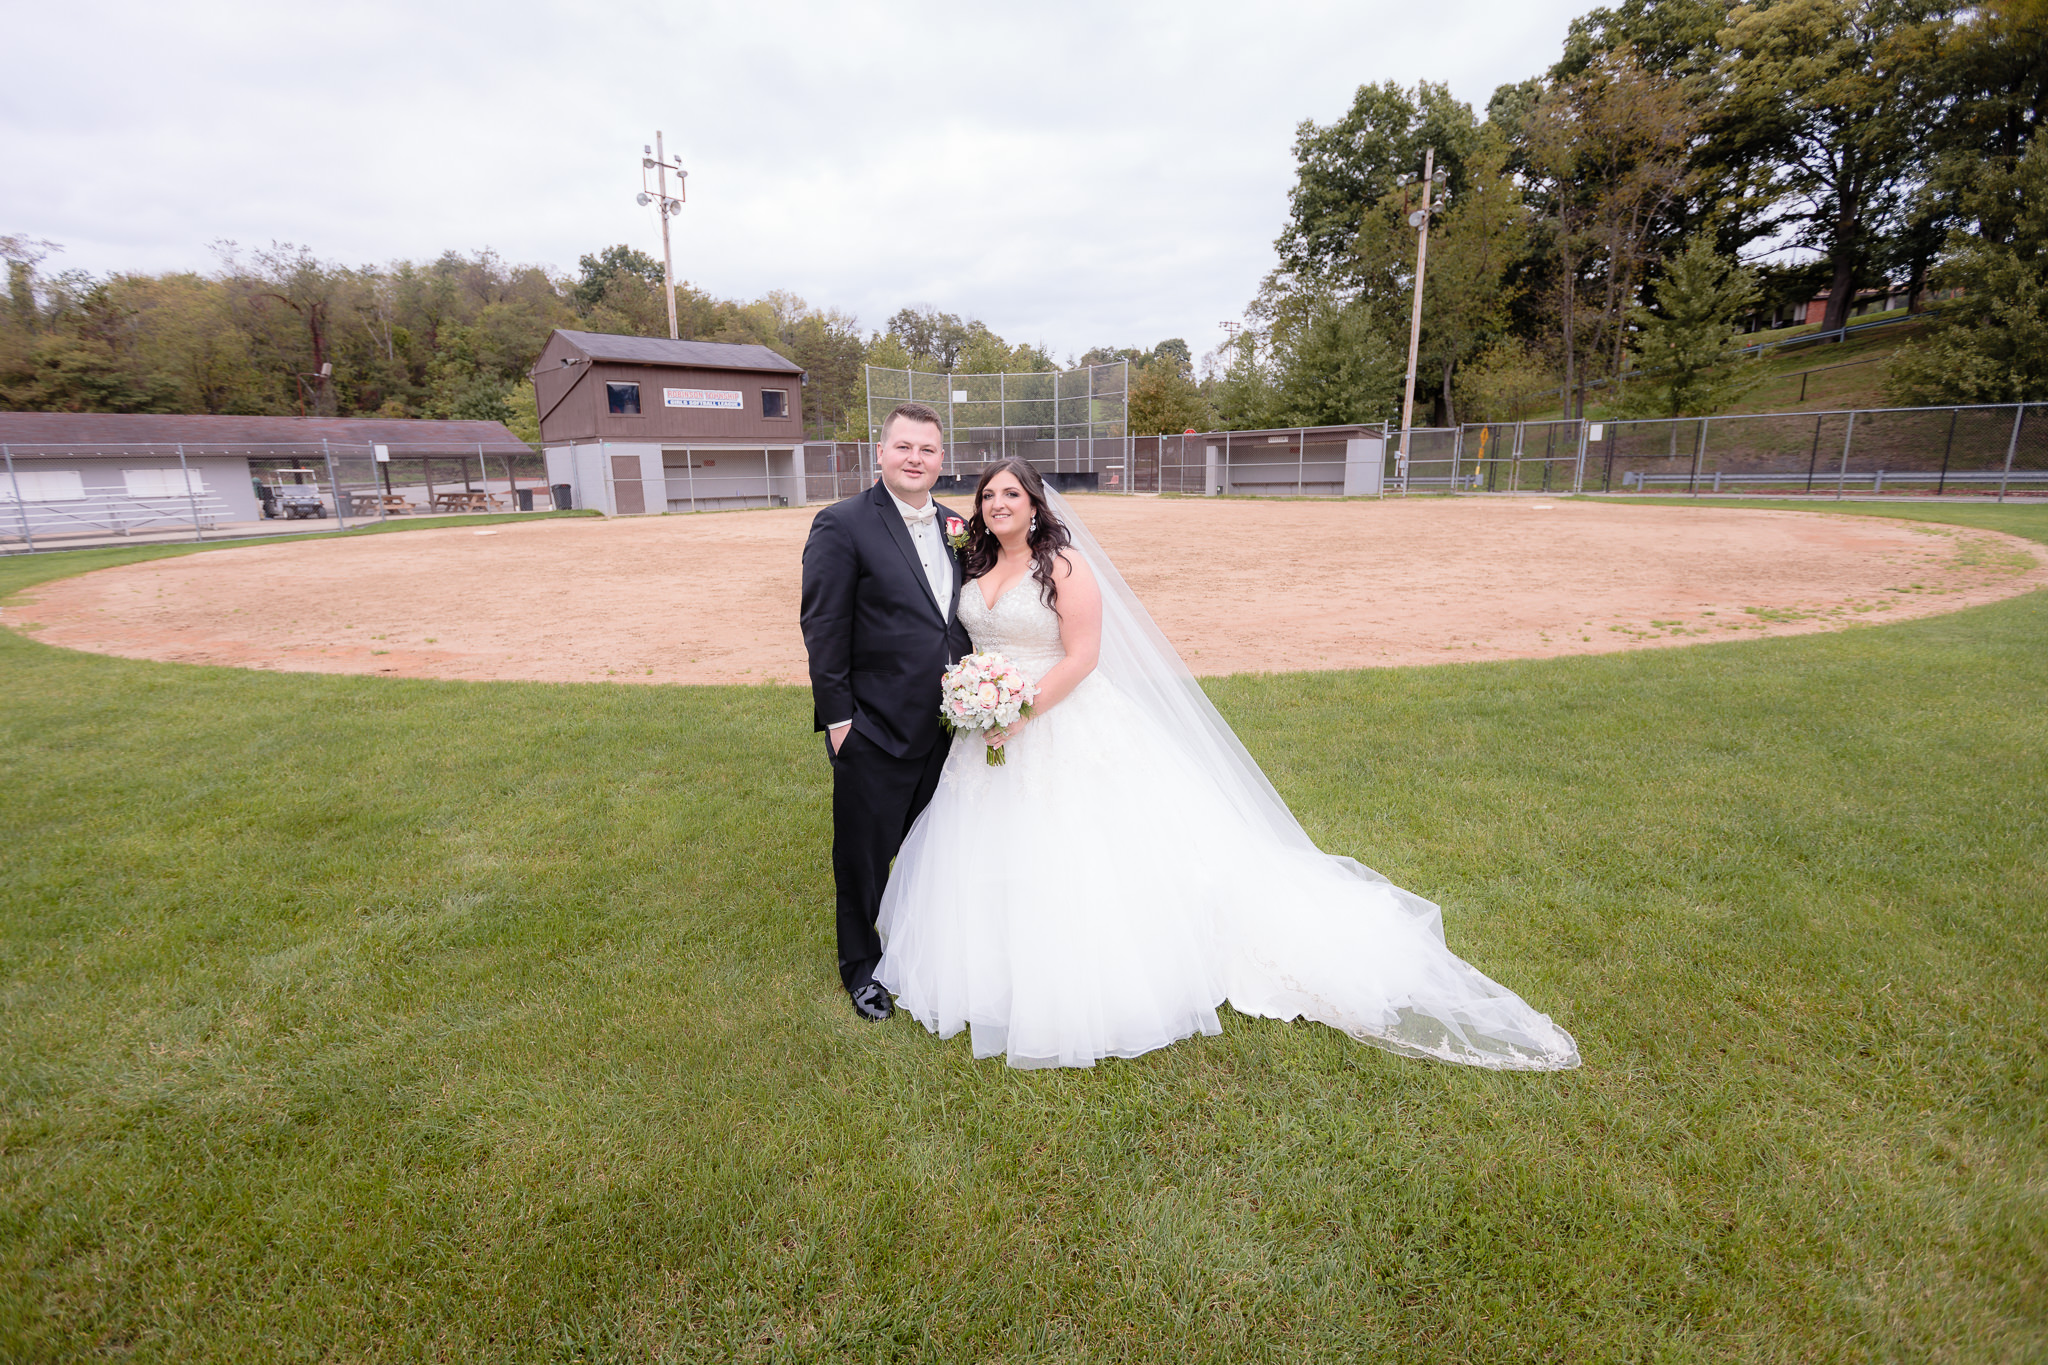 Newlyweds at the Robinson Township Girls Softball field where they met